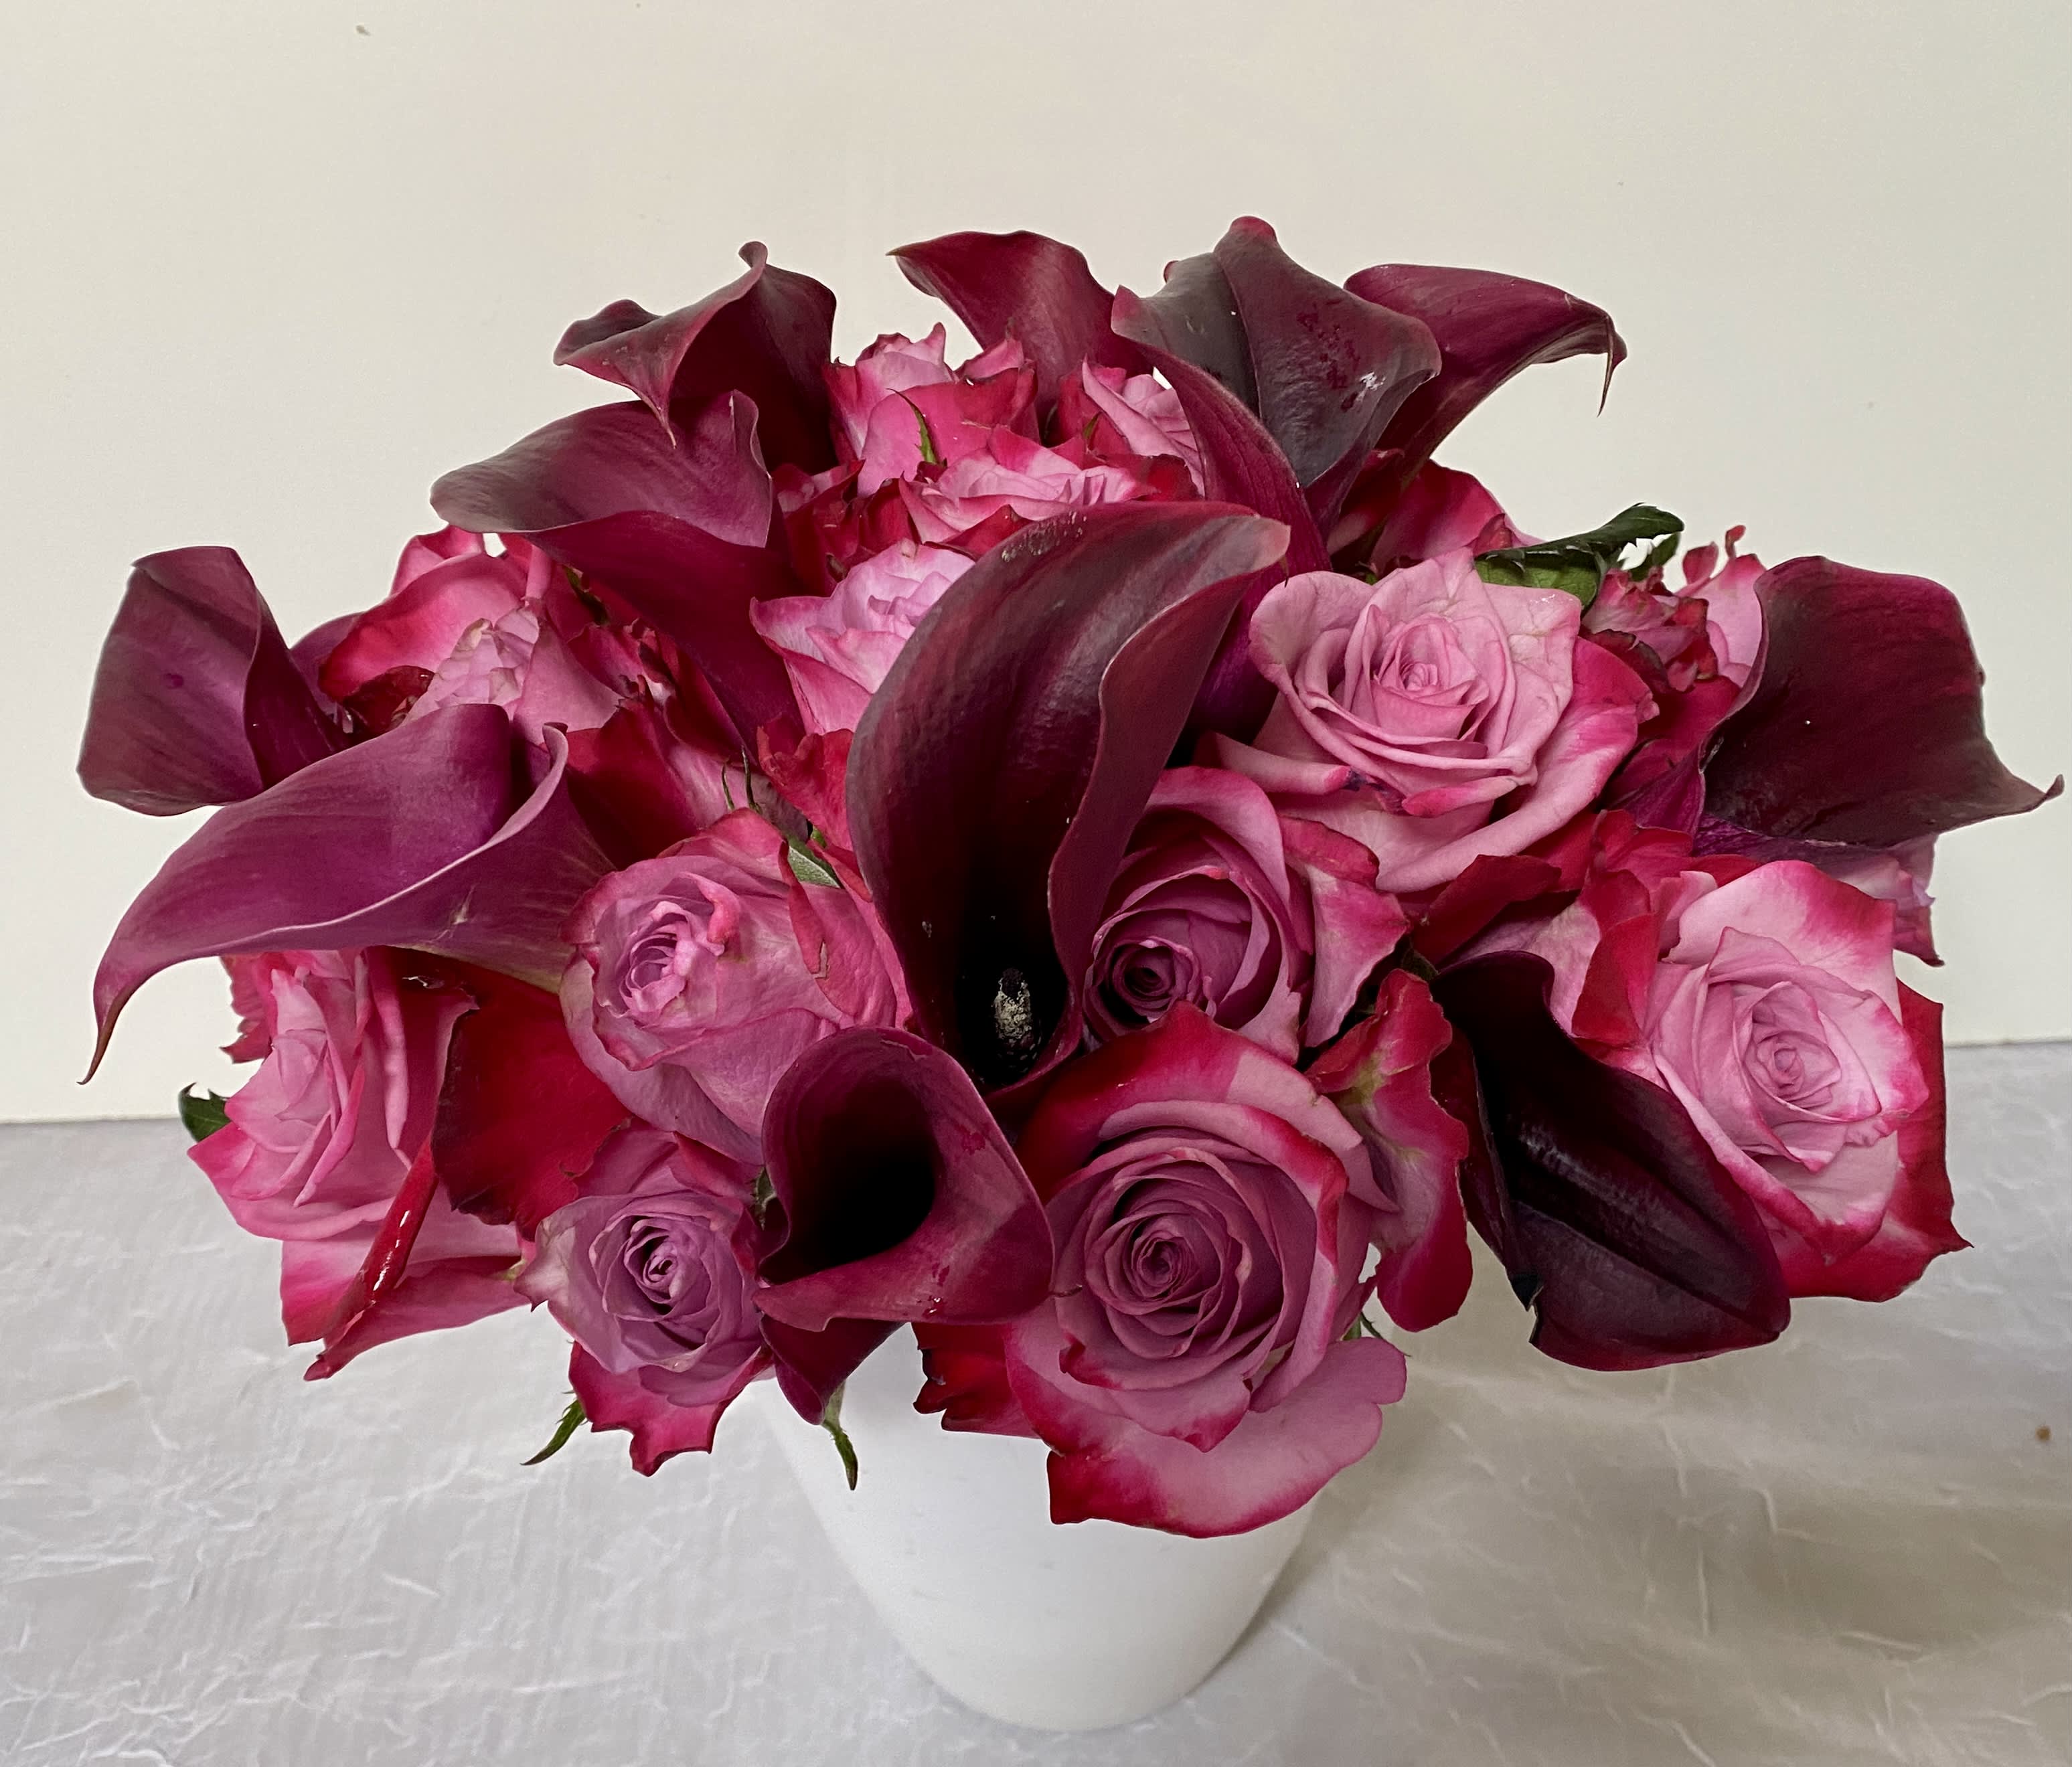 BROOKLYN - in a beautiful vase arrangement of purple roses and purple calla lily.